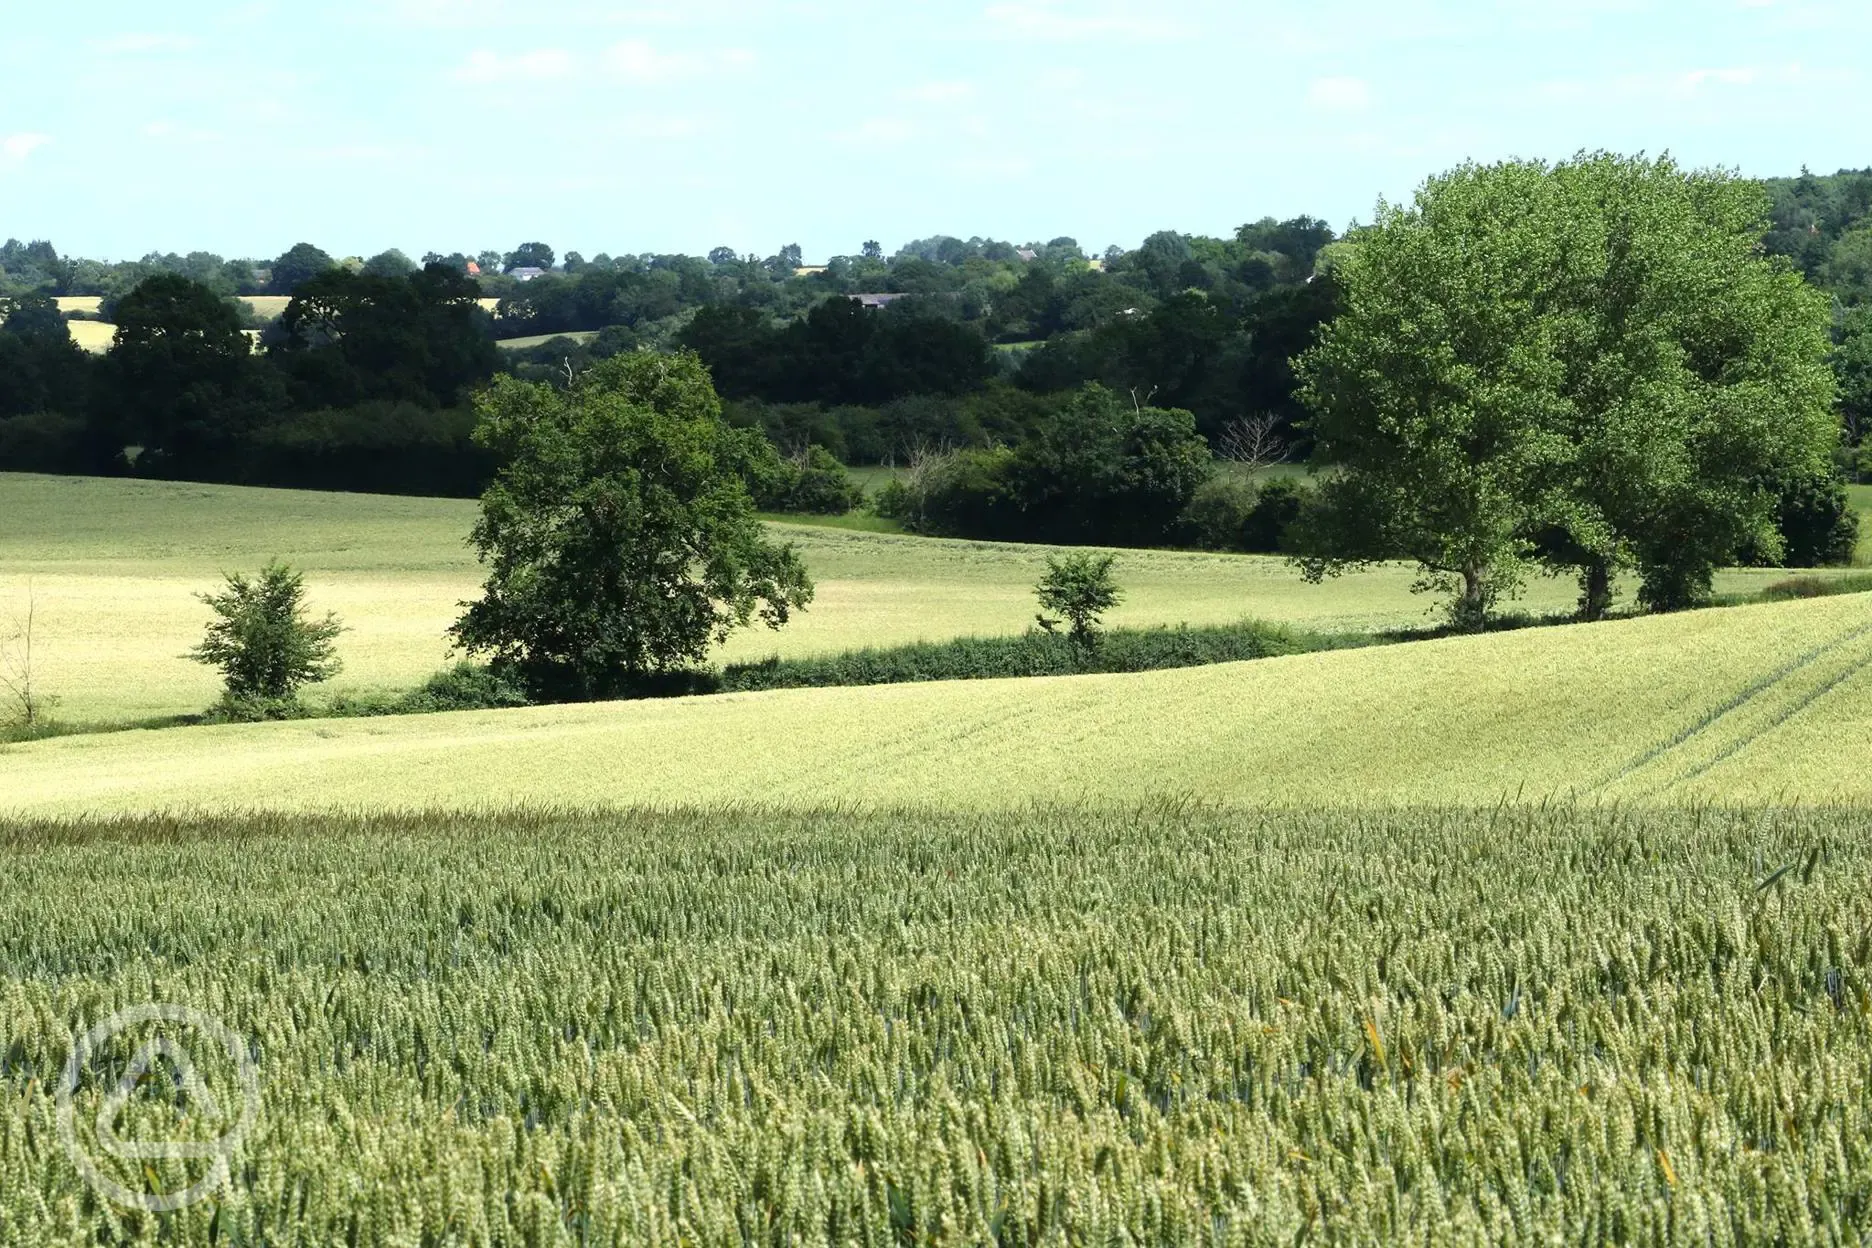 the site is surrounded by fields and woodlands